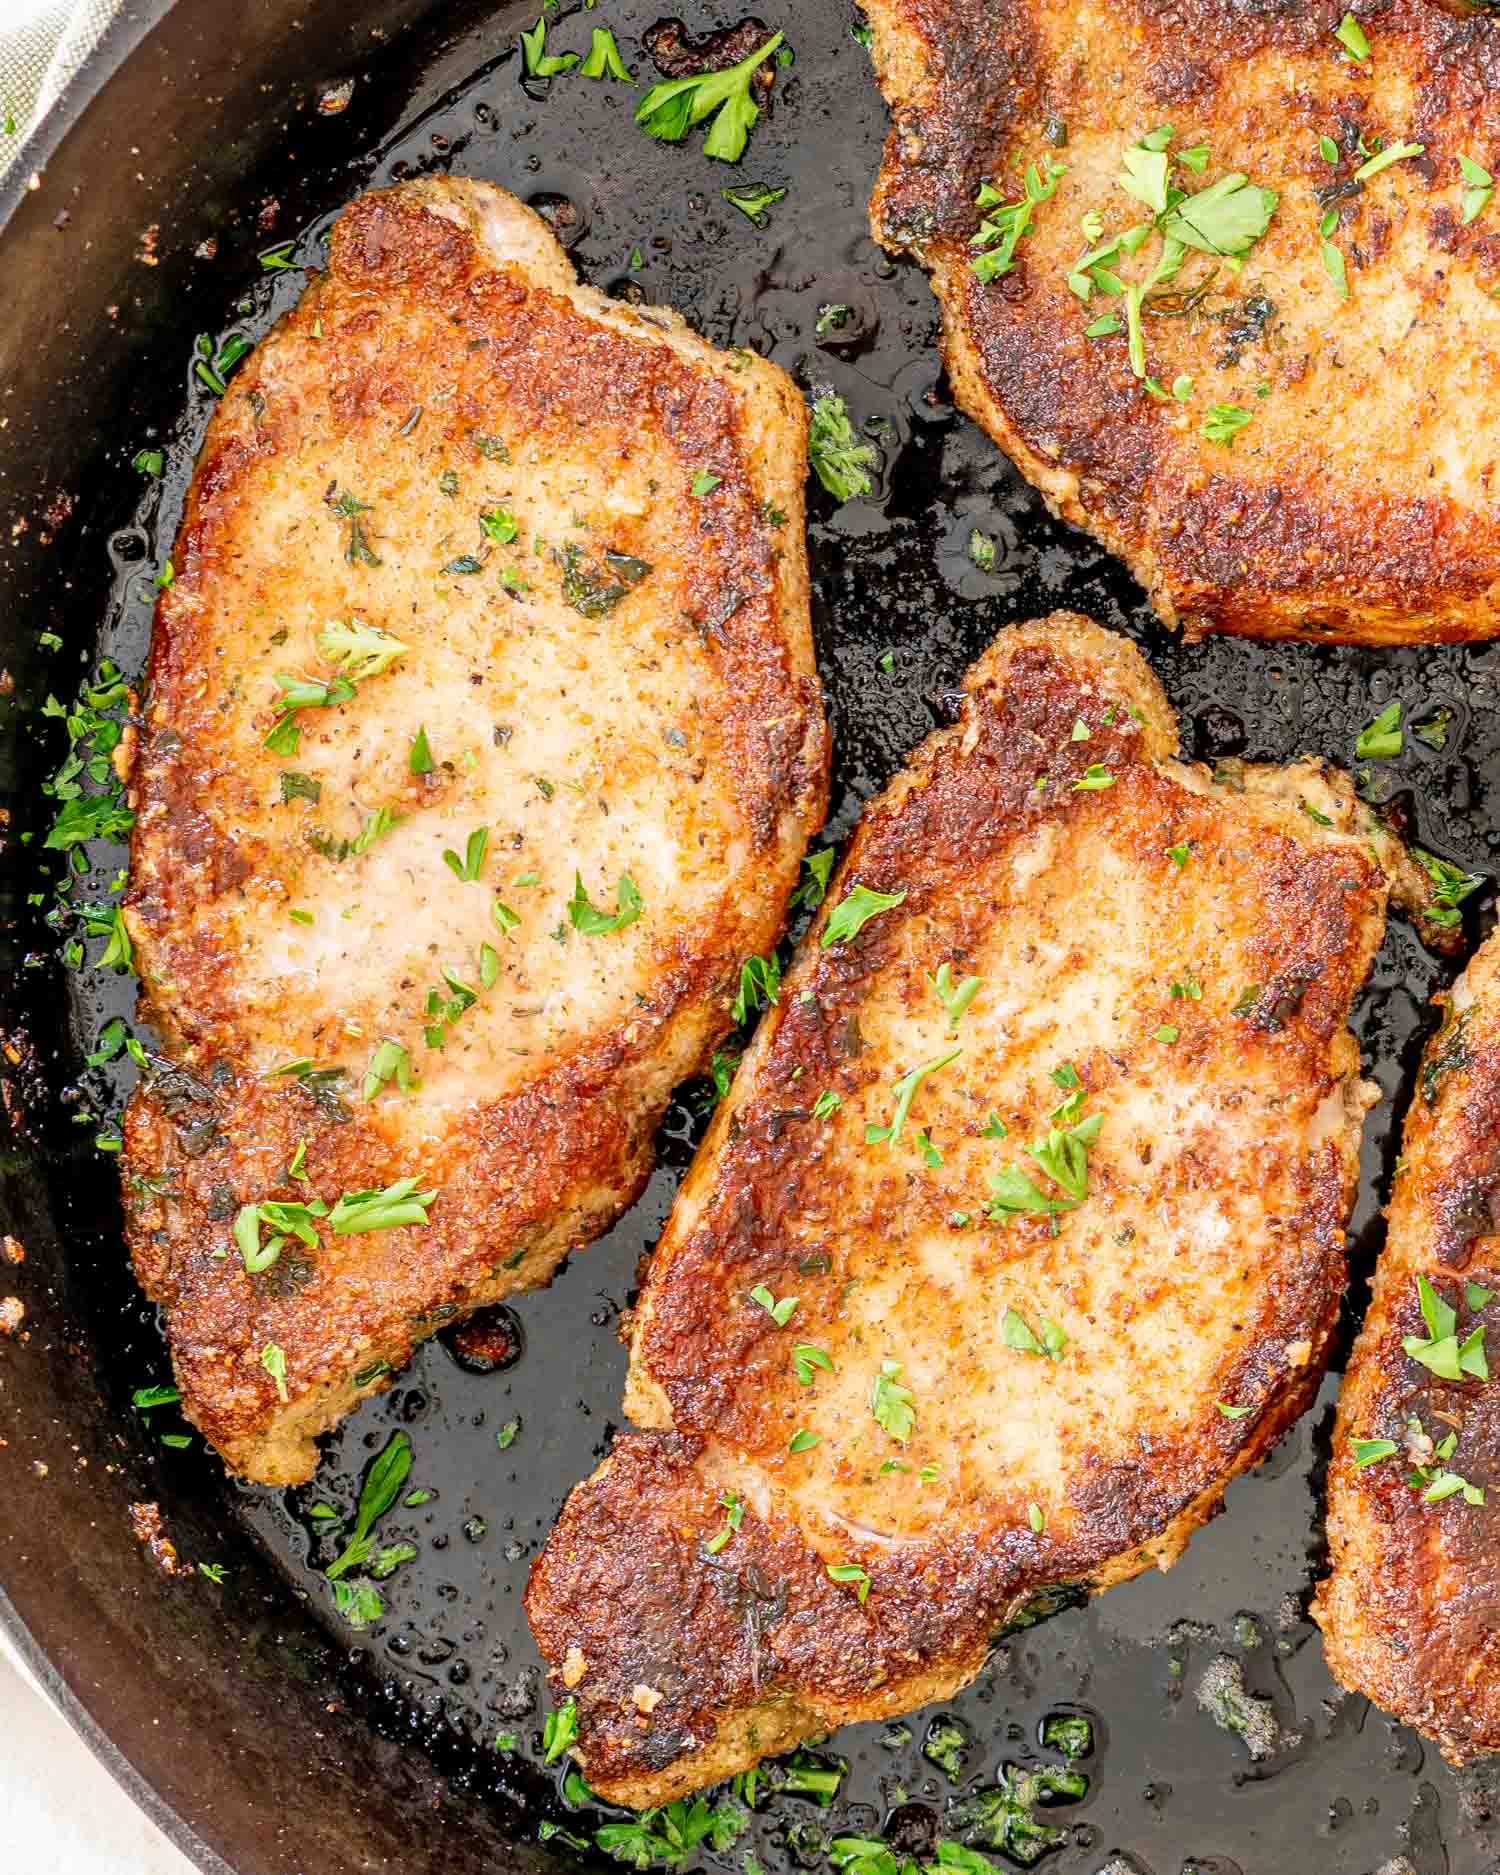 italian breaded pork chops in a cast iron skillet garnished with some parsley.